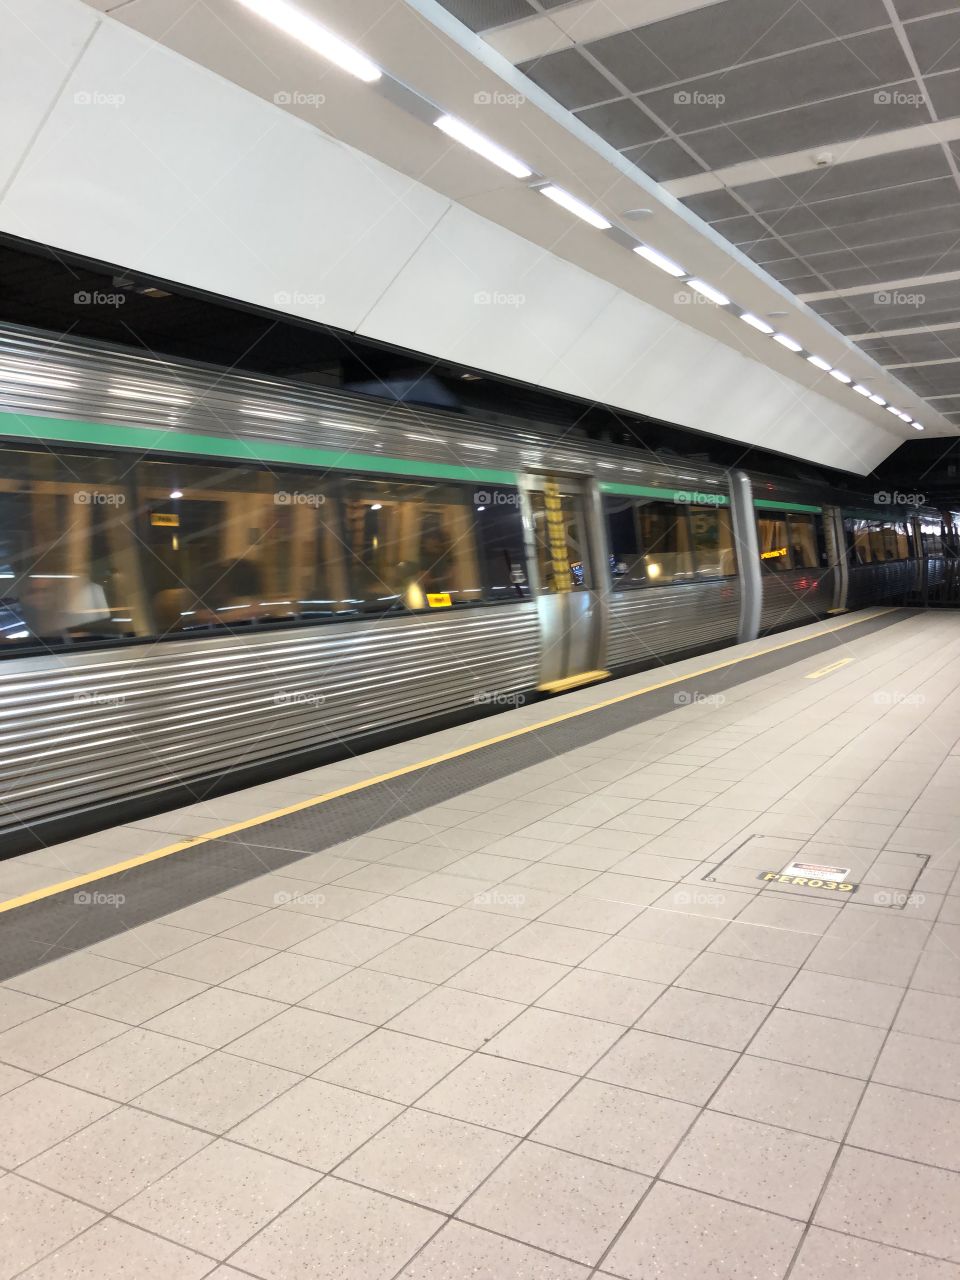 A train is coming to the platform 